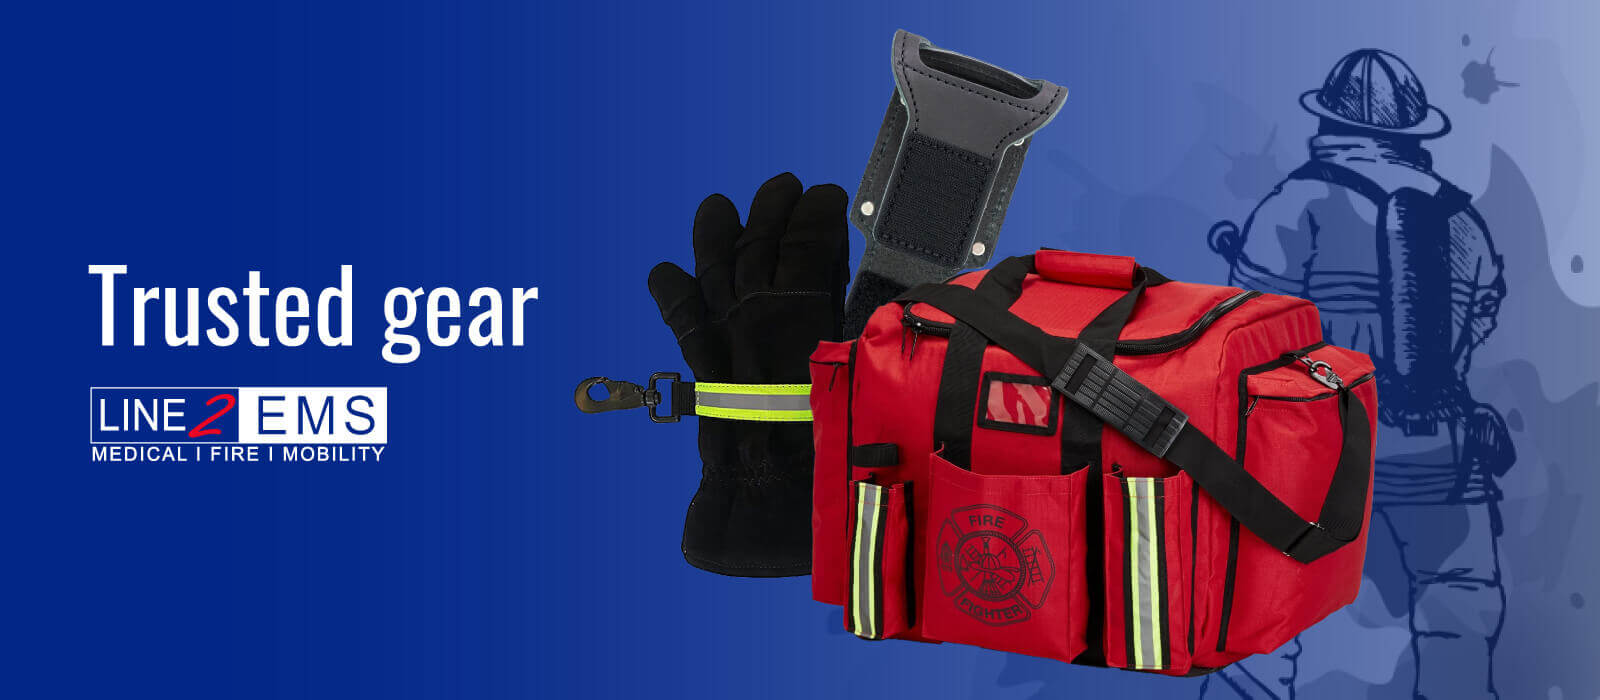 firefighter tools and gear functionality light, window, door, coat pocket, forcible entry tools